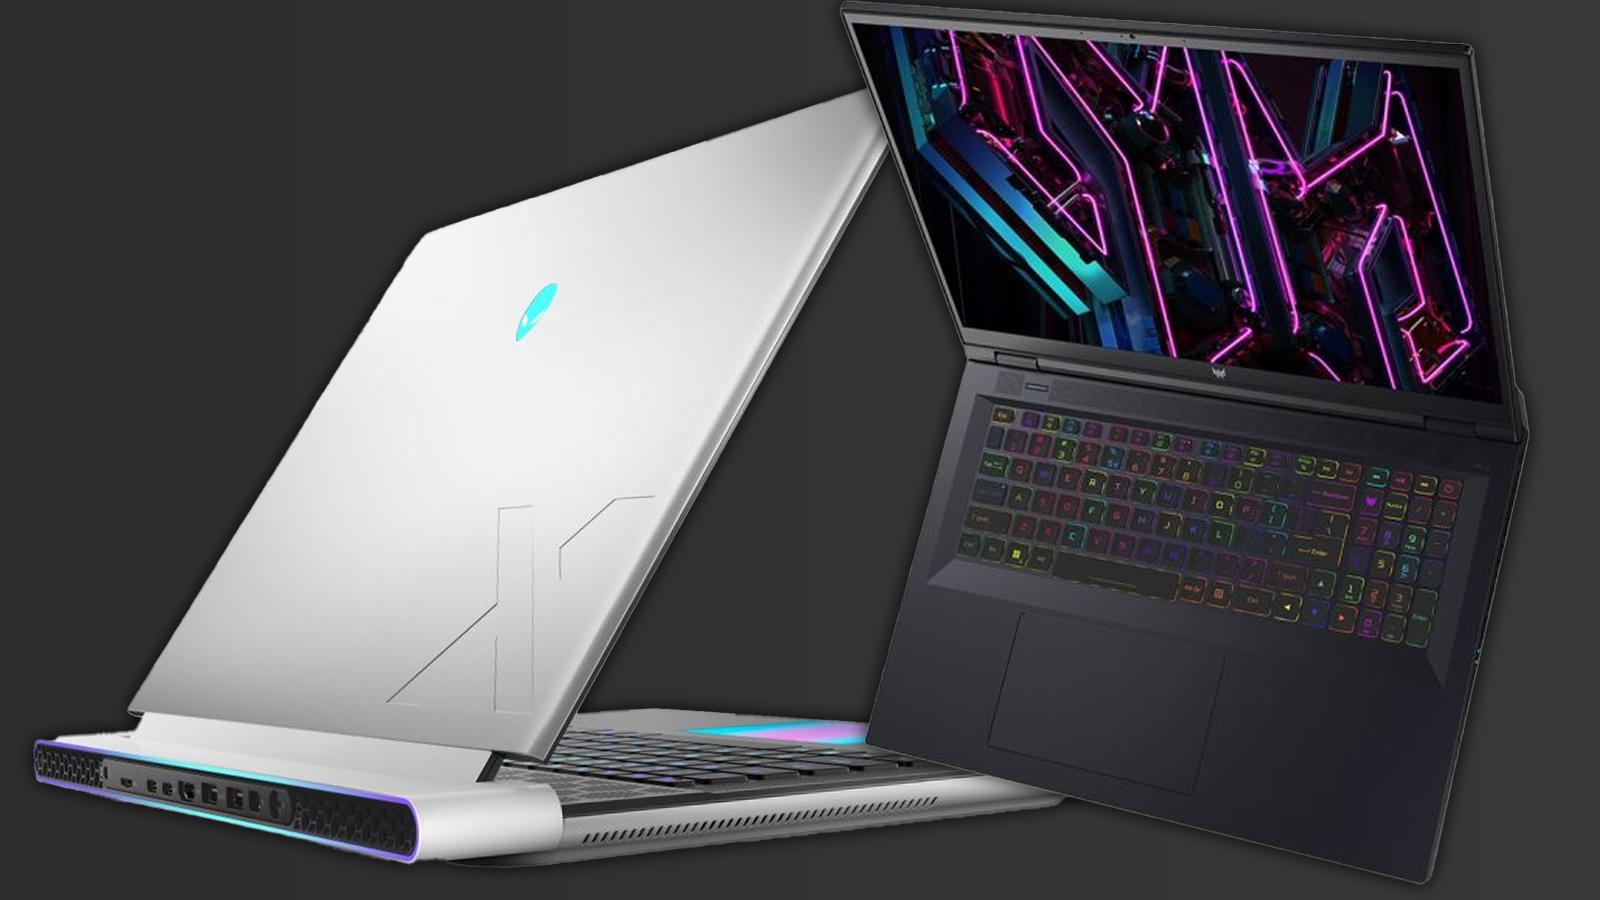 GeForce At CES 2023: RTX 40 Series Laptops, RTX 4070 Ti Graphics Cards,  DLSS Momentum Continues, RTX 4080-Performance Streaming on GeForce NOW &  More, GeForce News